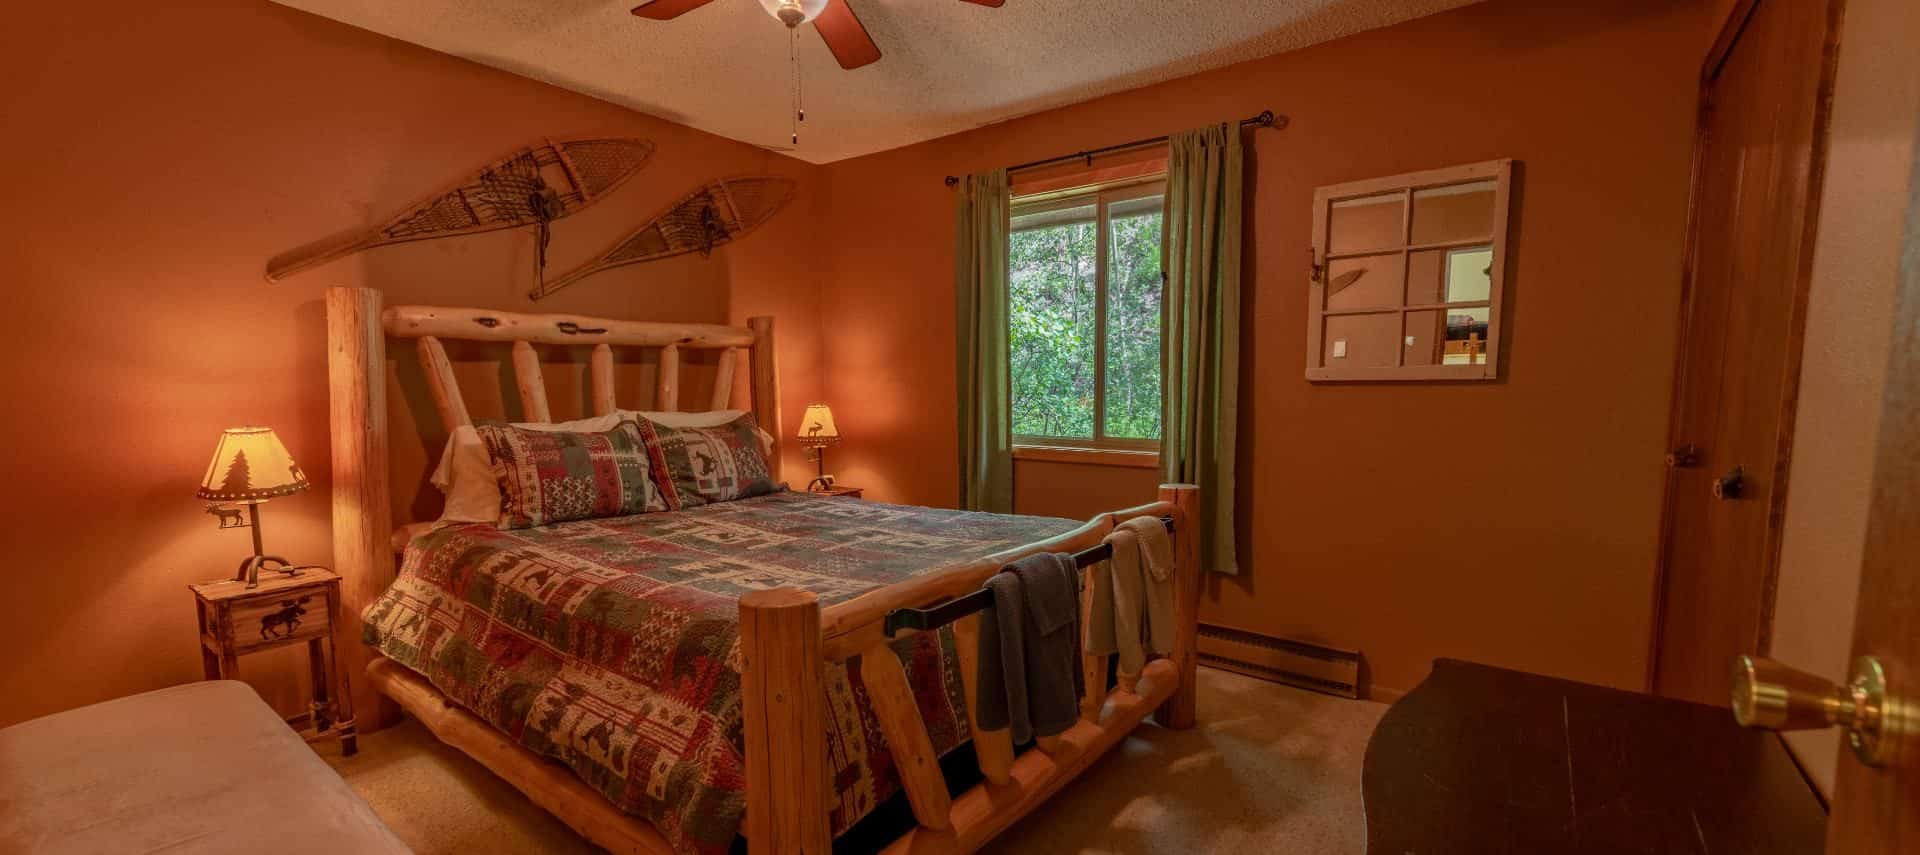 Bedroom with brown walls, carpeting, wooden log bed, homemade quilt, and wooden nightstands